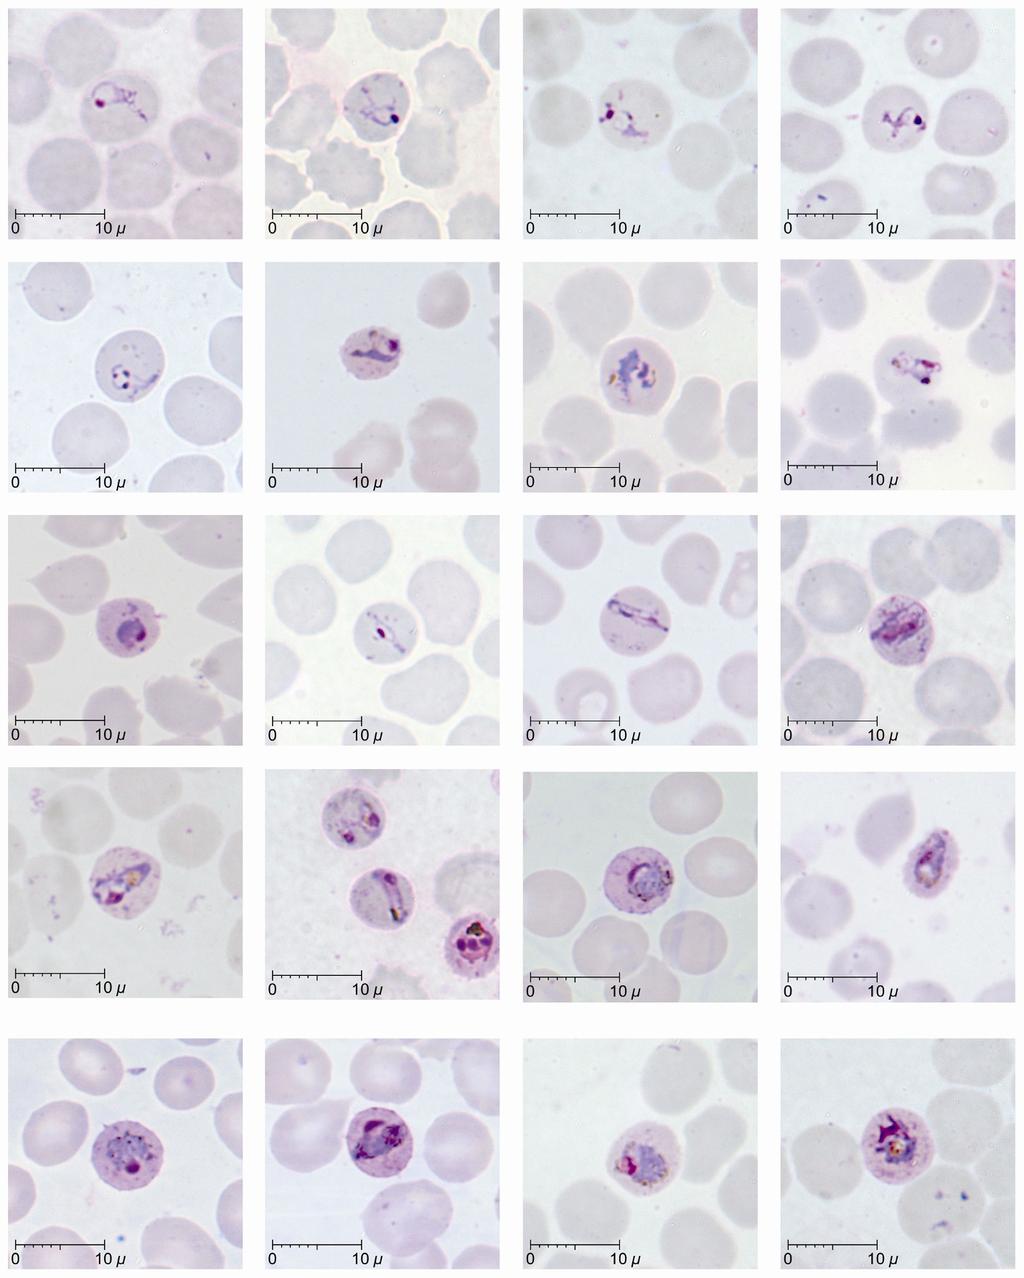 a b c d e f g h i j k l m n o p q r s t Late Figure (a-l) 2and mature (m-t) trophozoites of P. knowlesi parasites in human infections Late (a-l) and mature (m-t) trophozoites of P.